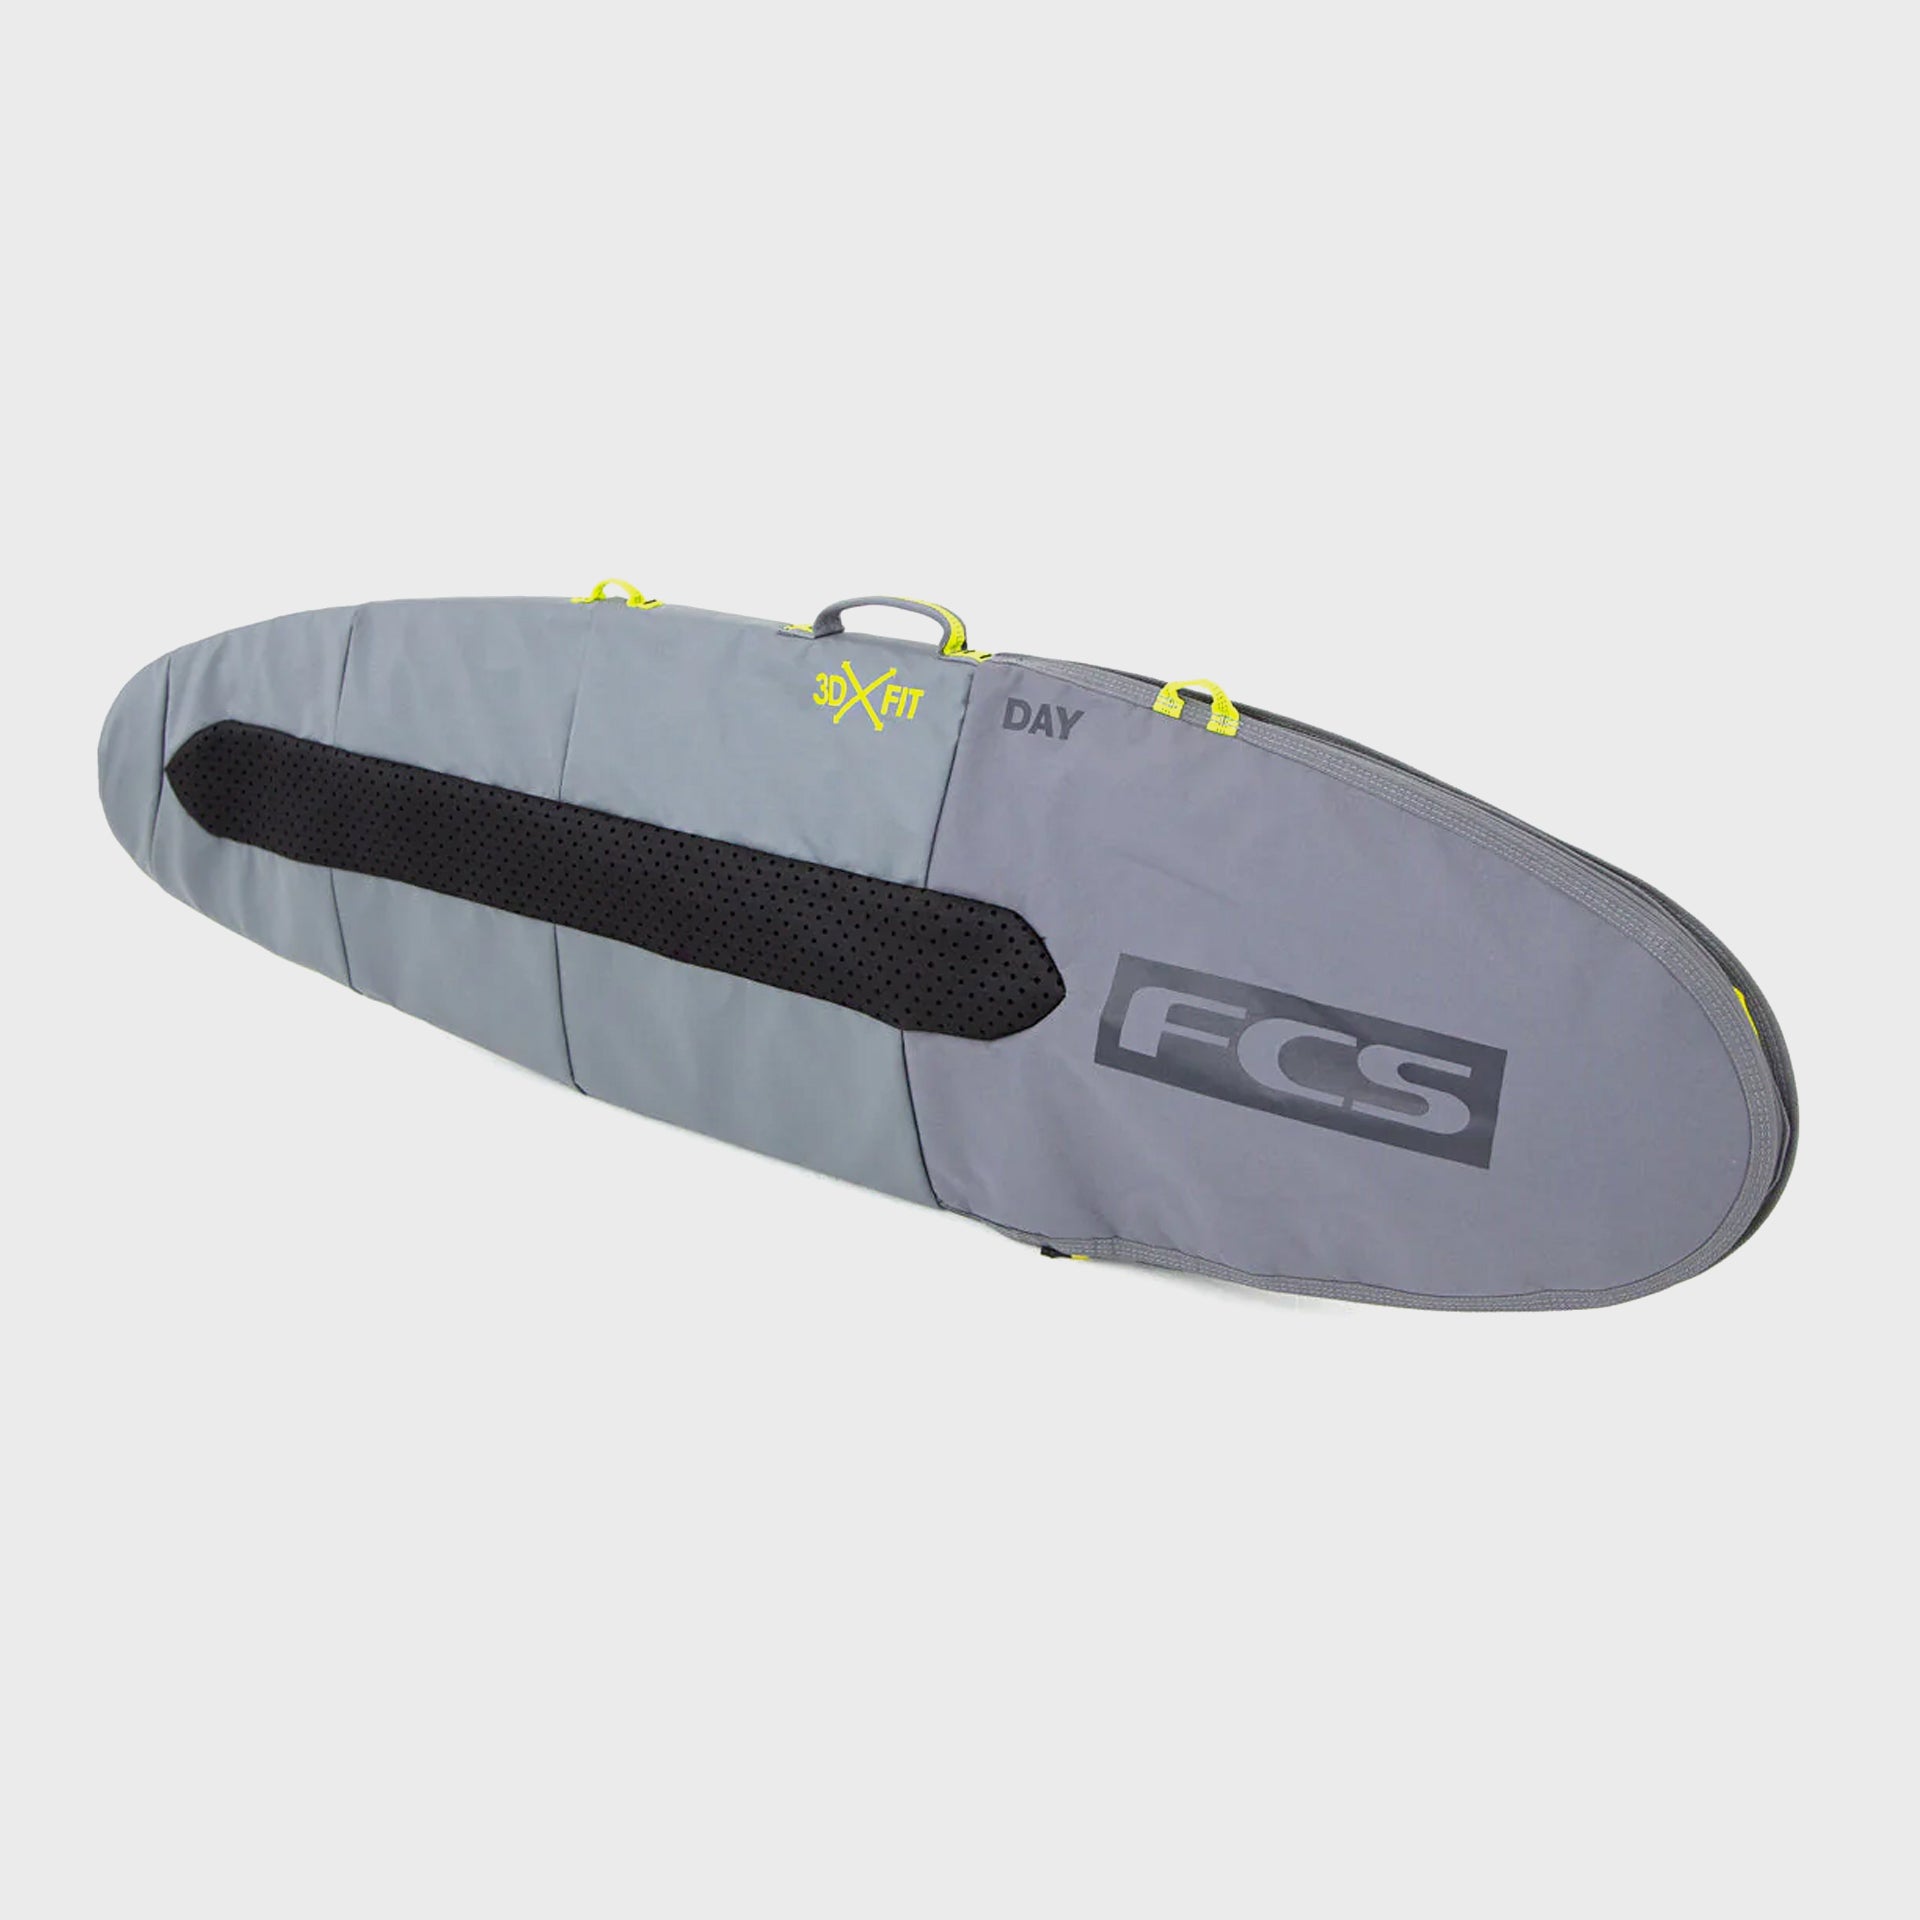 FCS Day cover - 3DX FIT - 7'6 - Cool Grey - ManGo Surfing